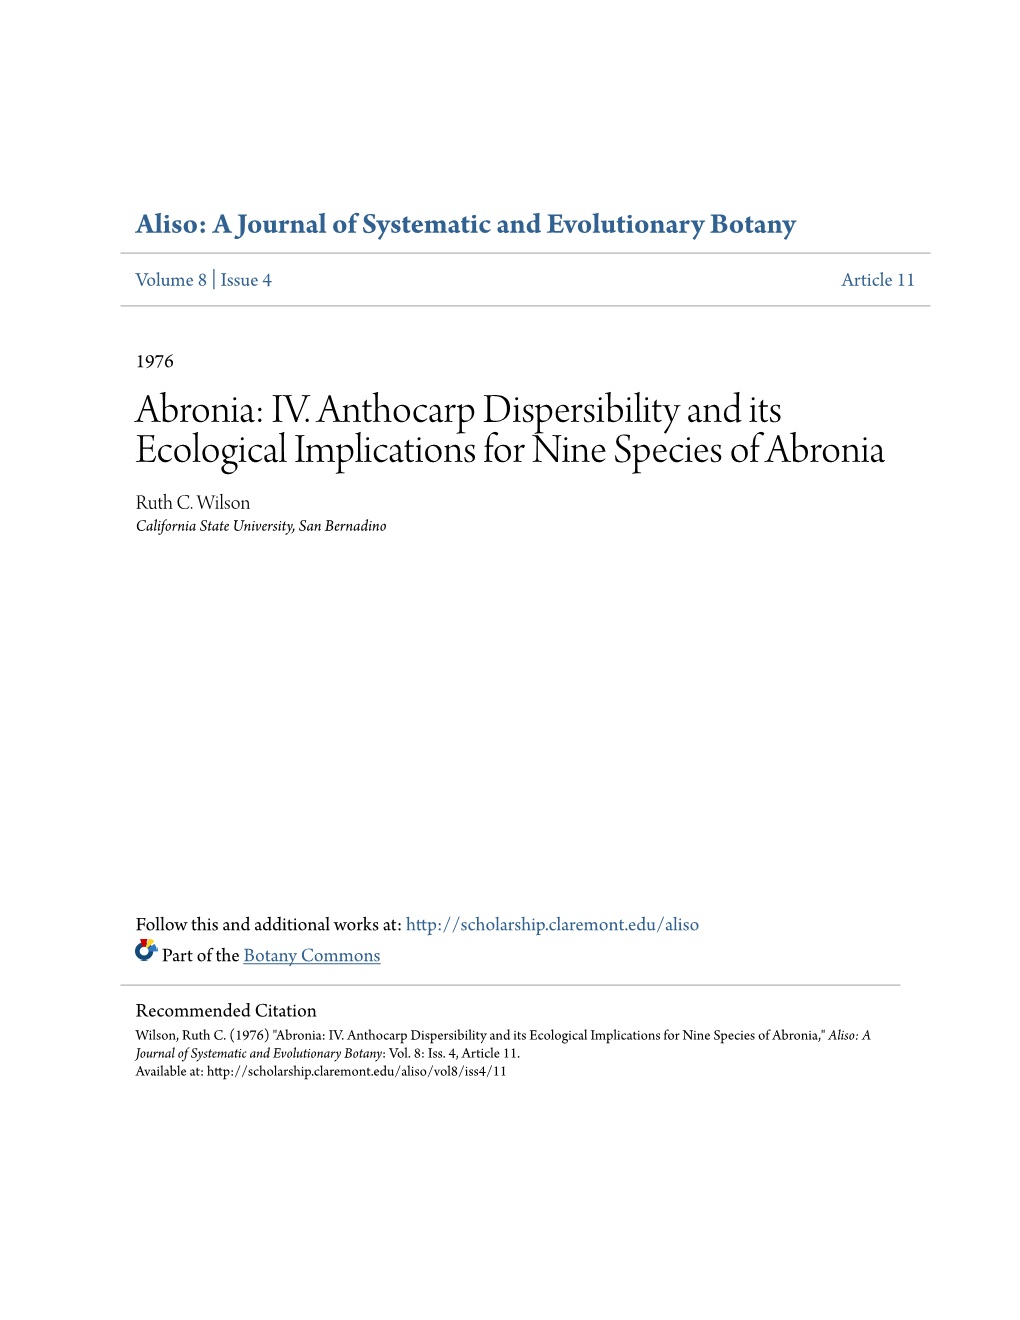 IV. Anthocarp Dispersibility and Its Ecological Implications for Nine Species of Abronia Ruth C